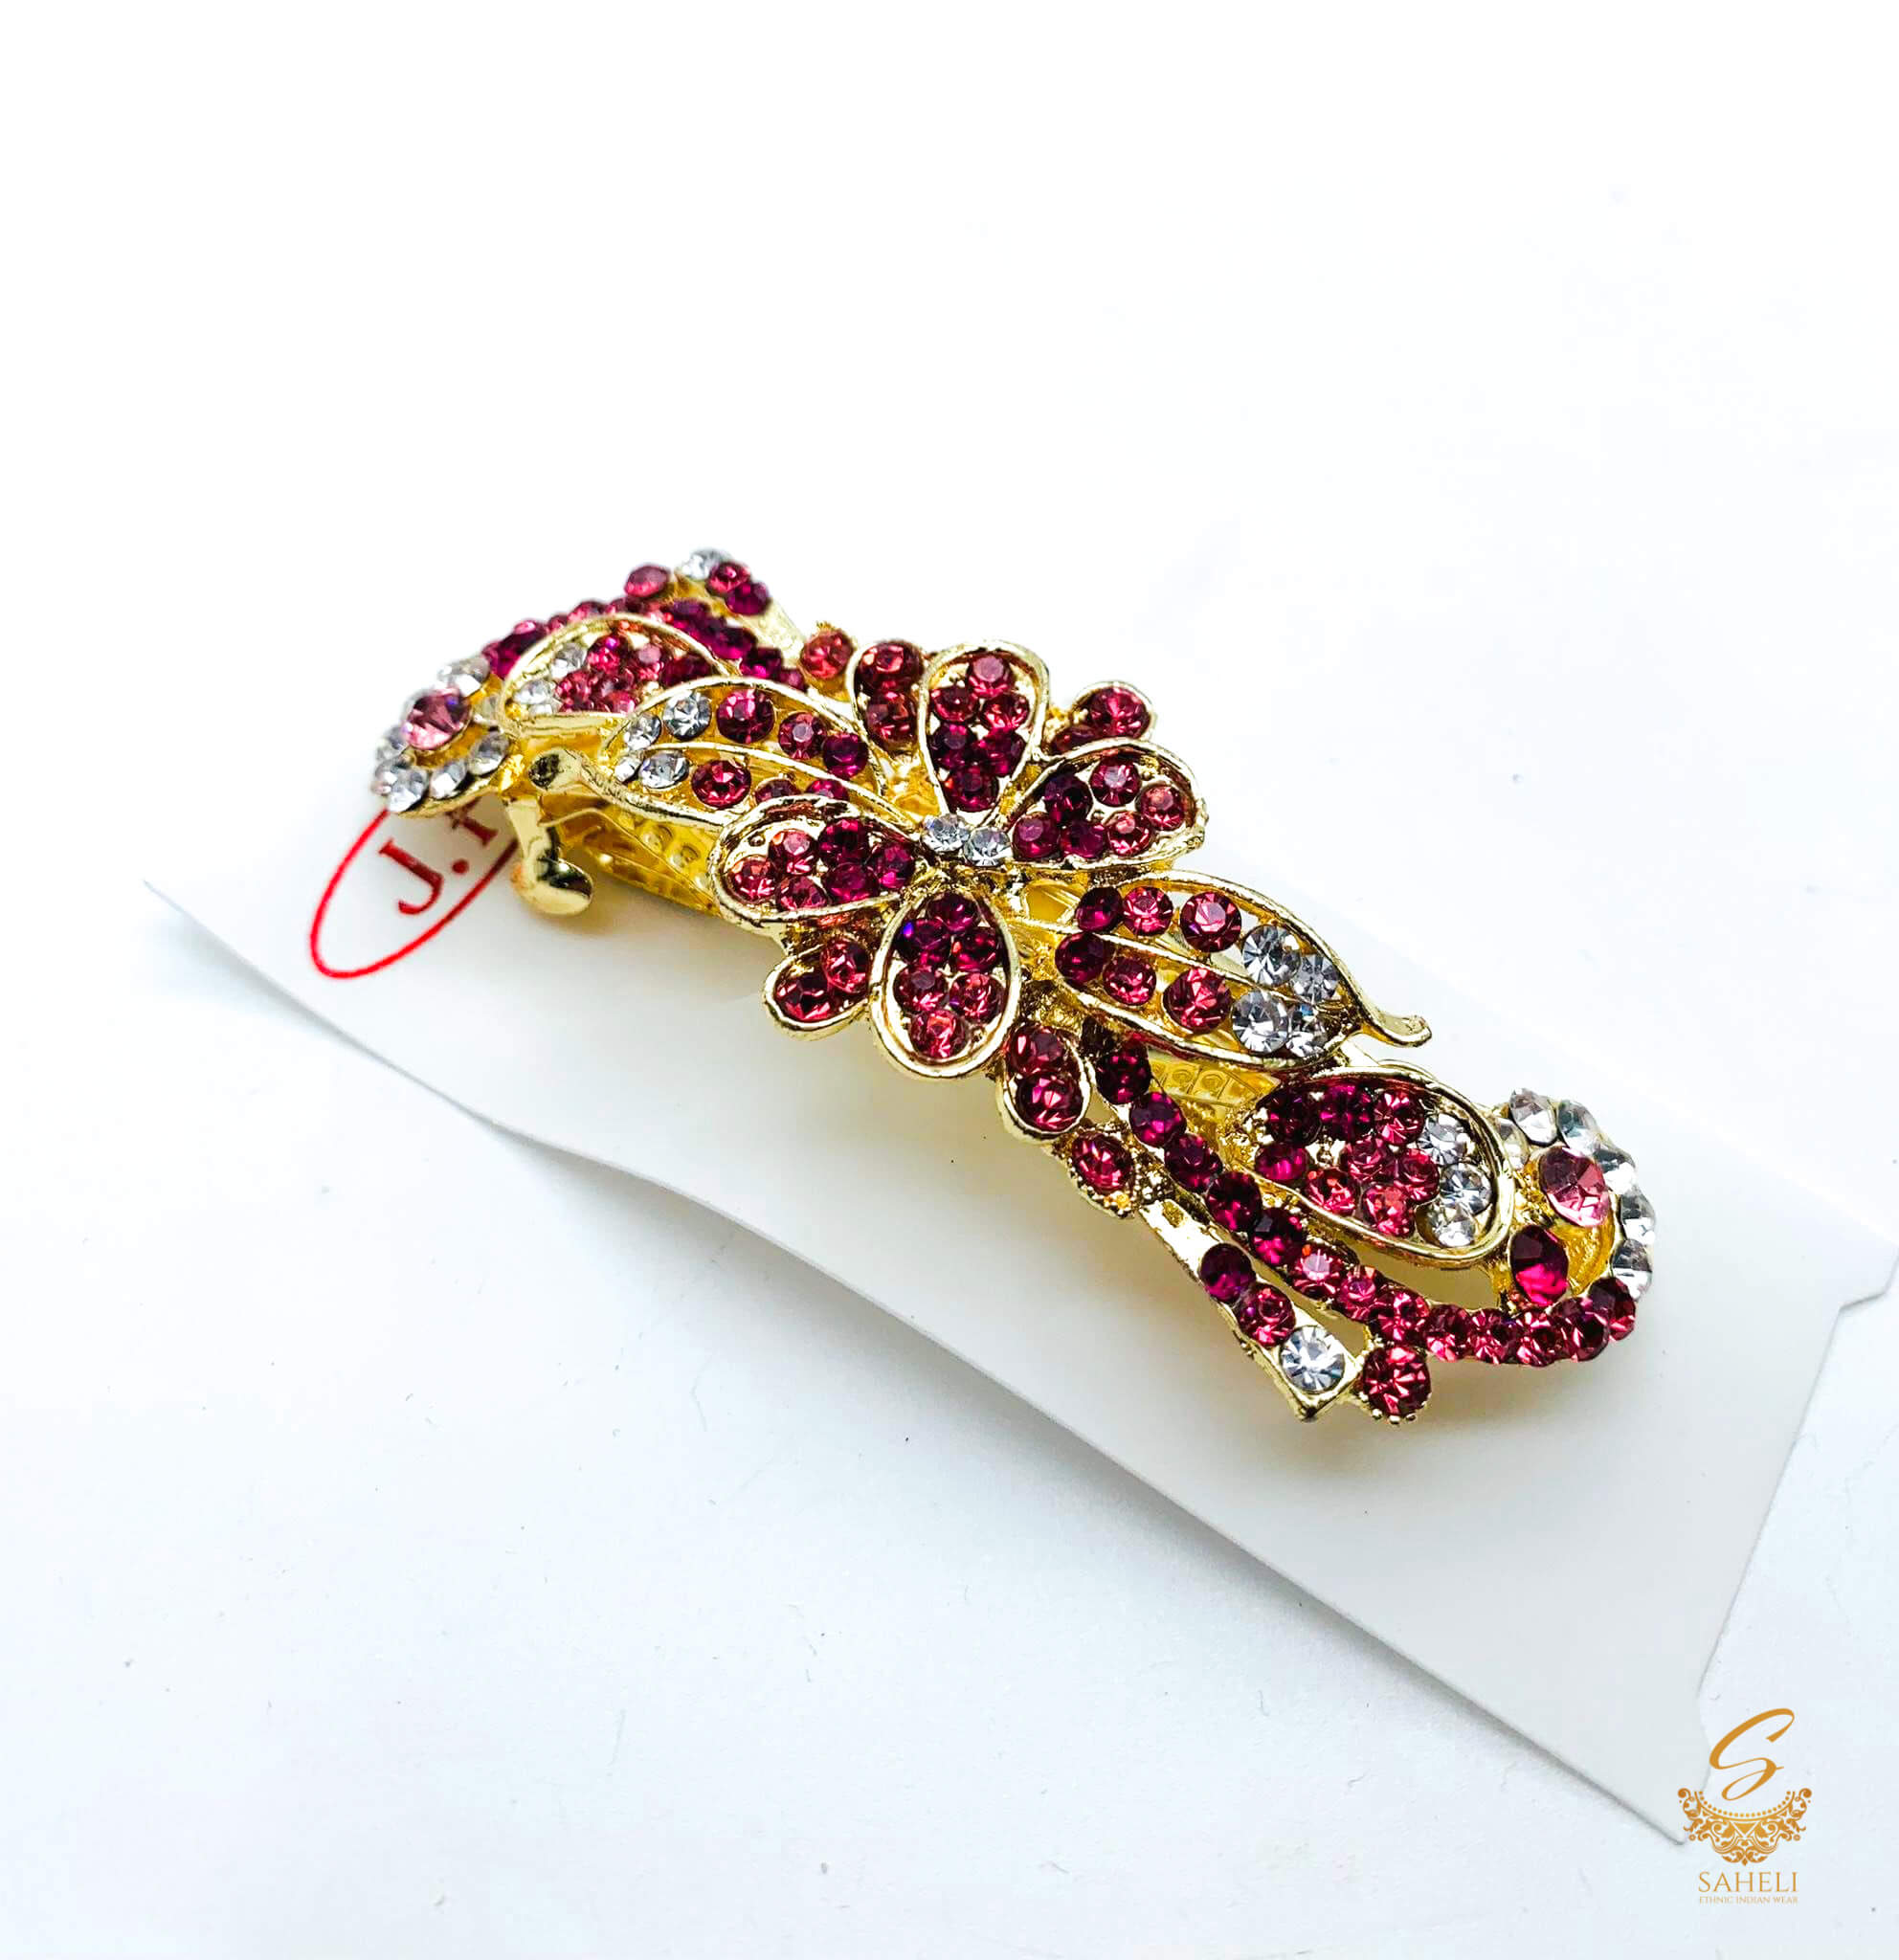 Buy Hair clip with stones Online at Low Prices in India - Amazon.in